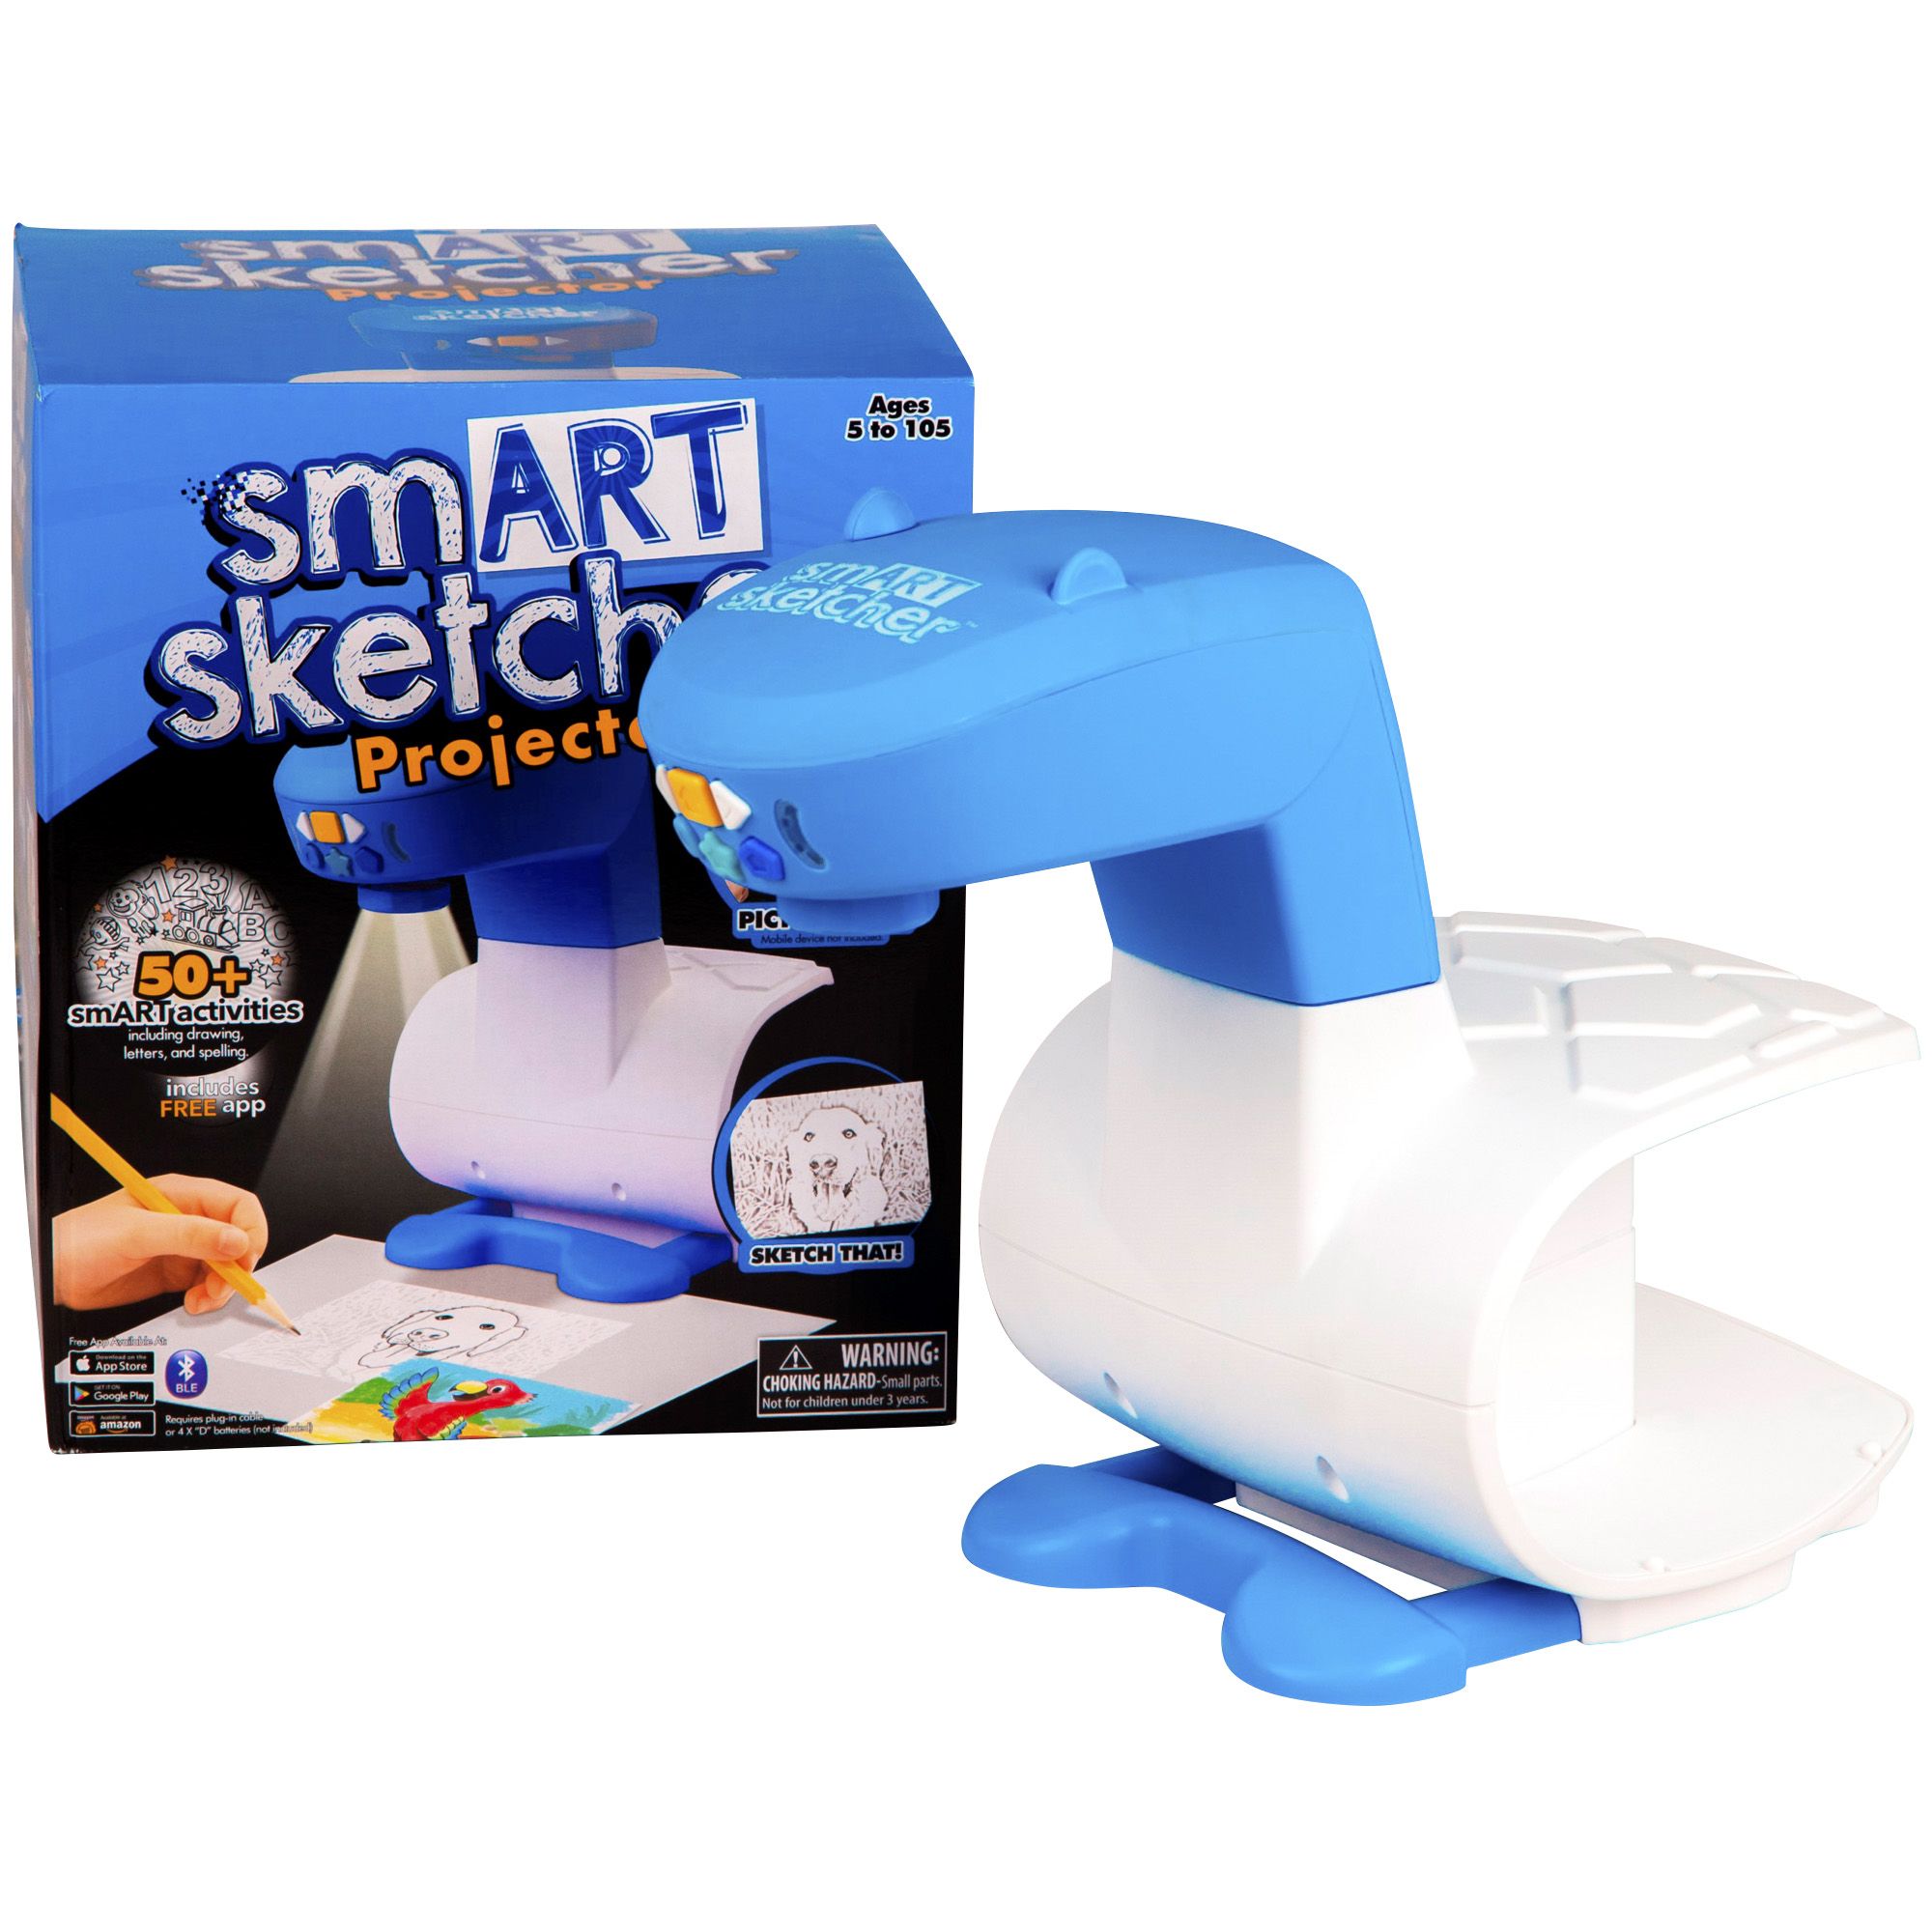 Project & Sketch anything with the #awardwinning smART sketcher 2.0 pr